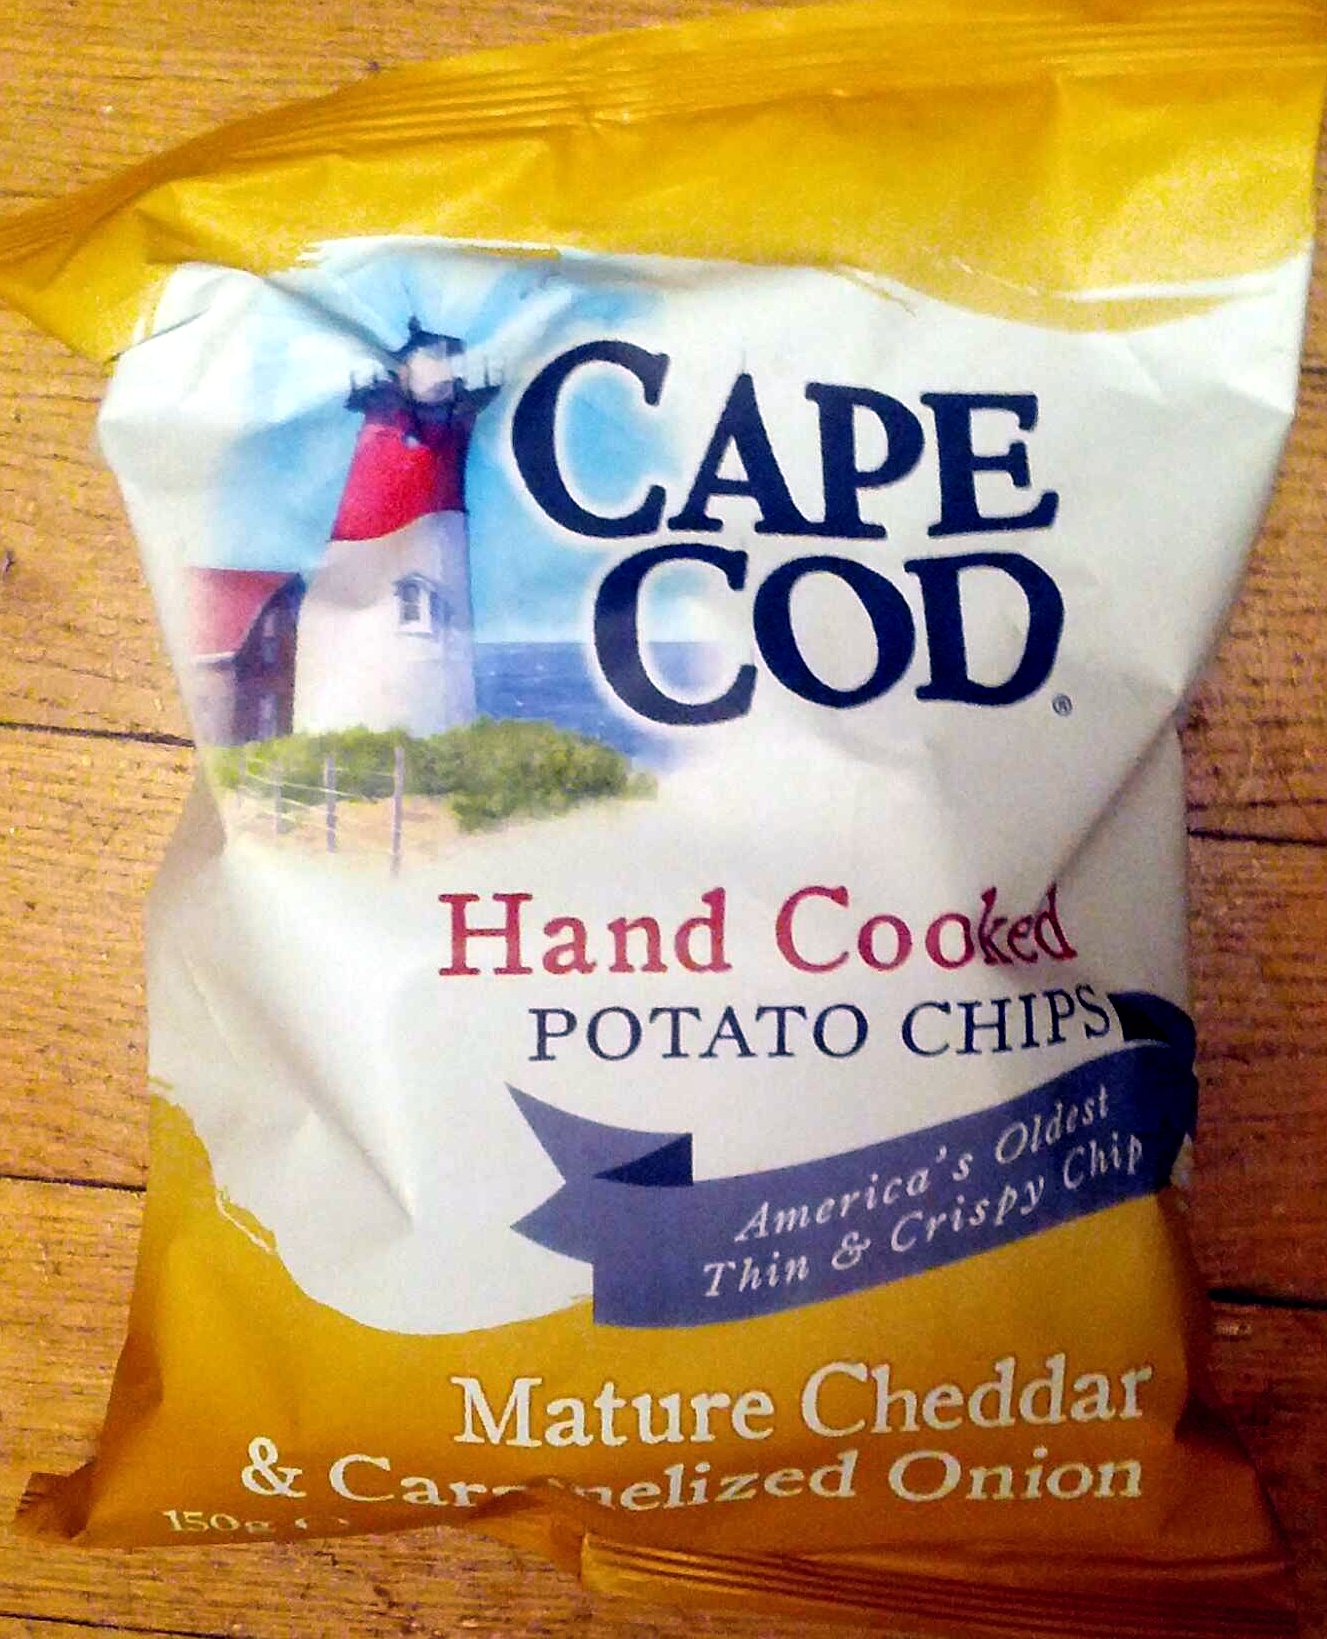 Hand Cooked Potato Chips Mature Cheddar & Caramelized Onion - Product - fr